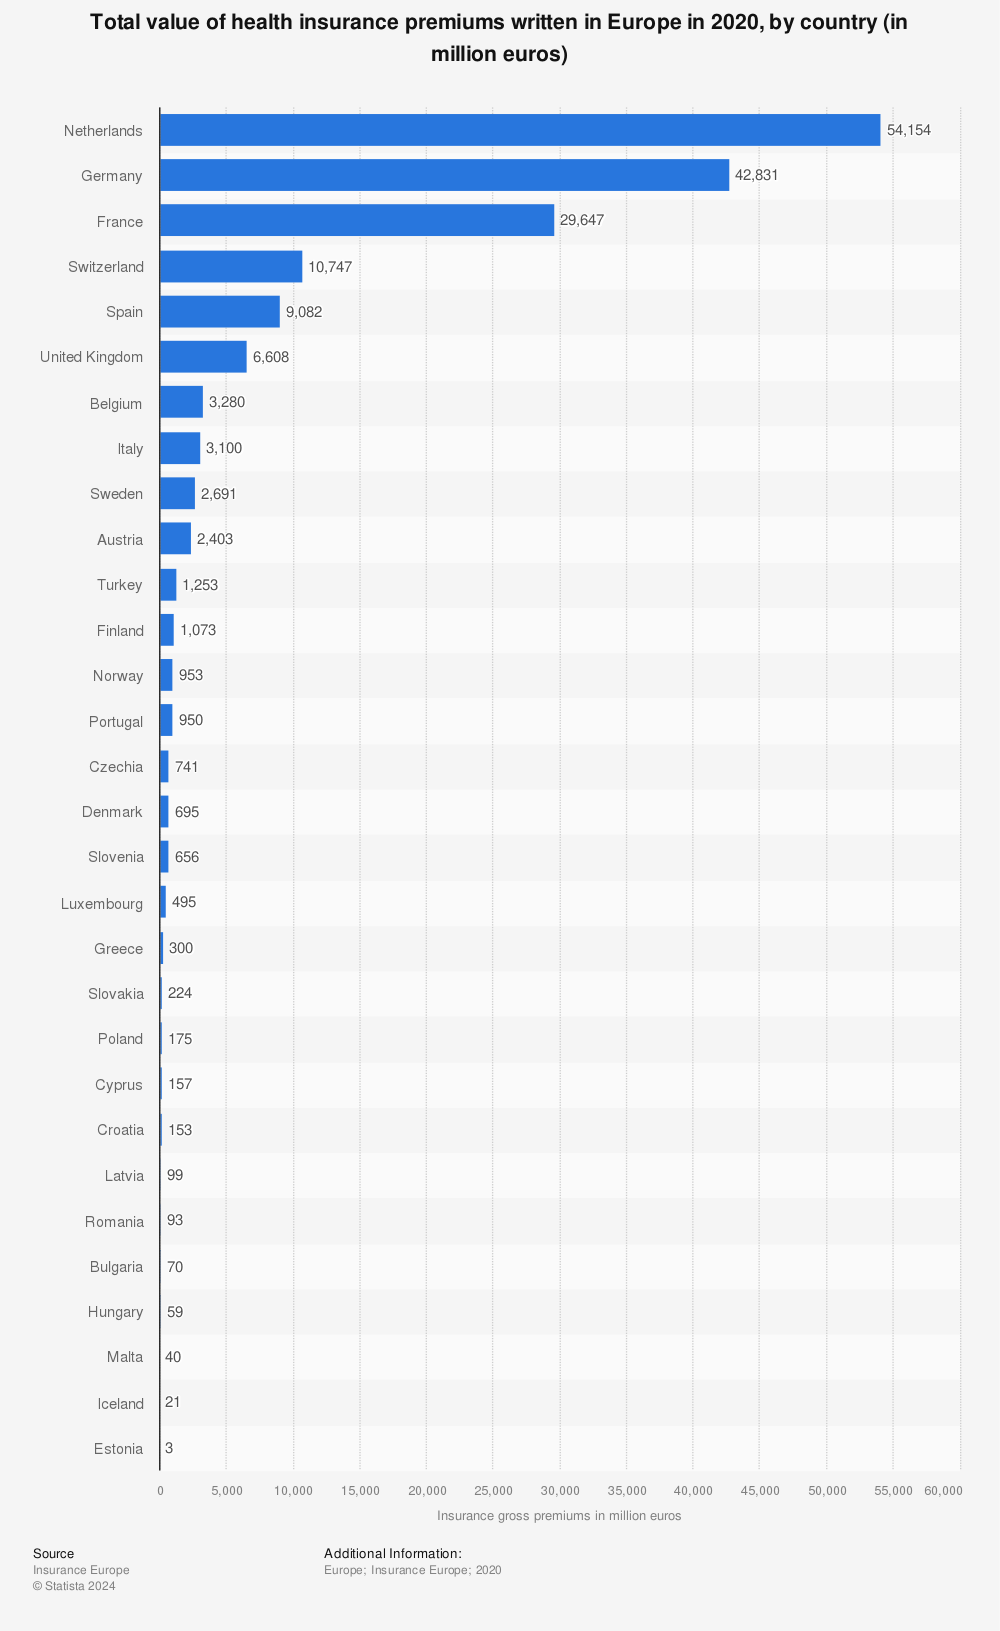 Statistic: Total value of health insurance premiums written in Europe in 2020, by country (in million euros) | Statista